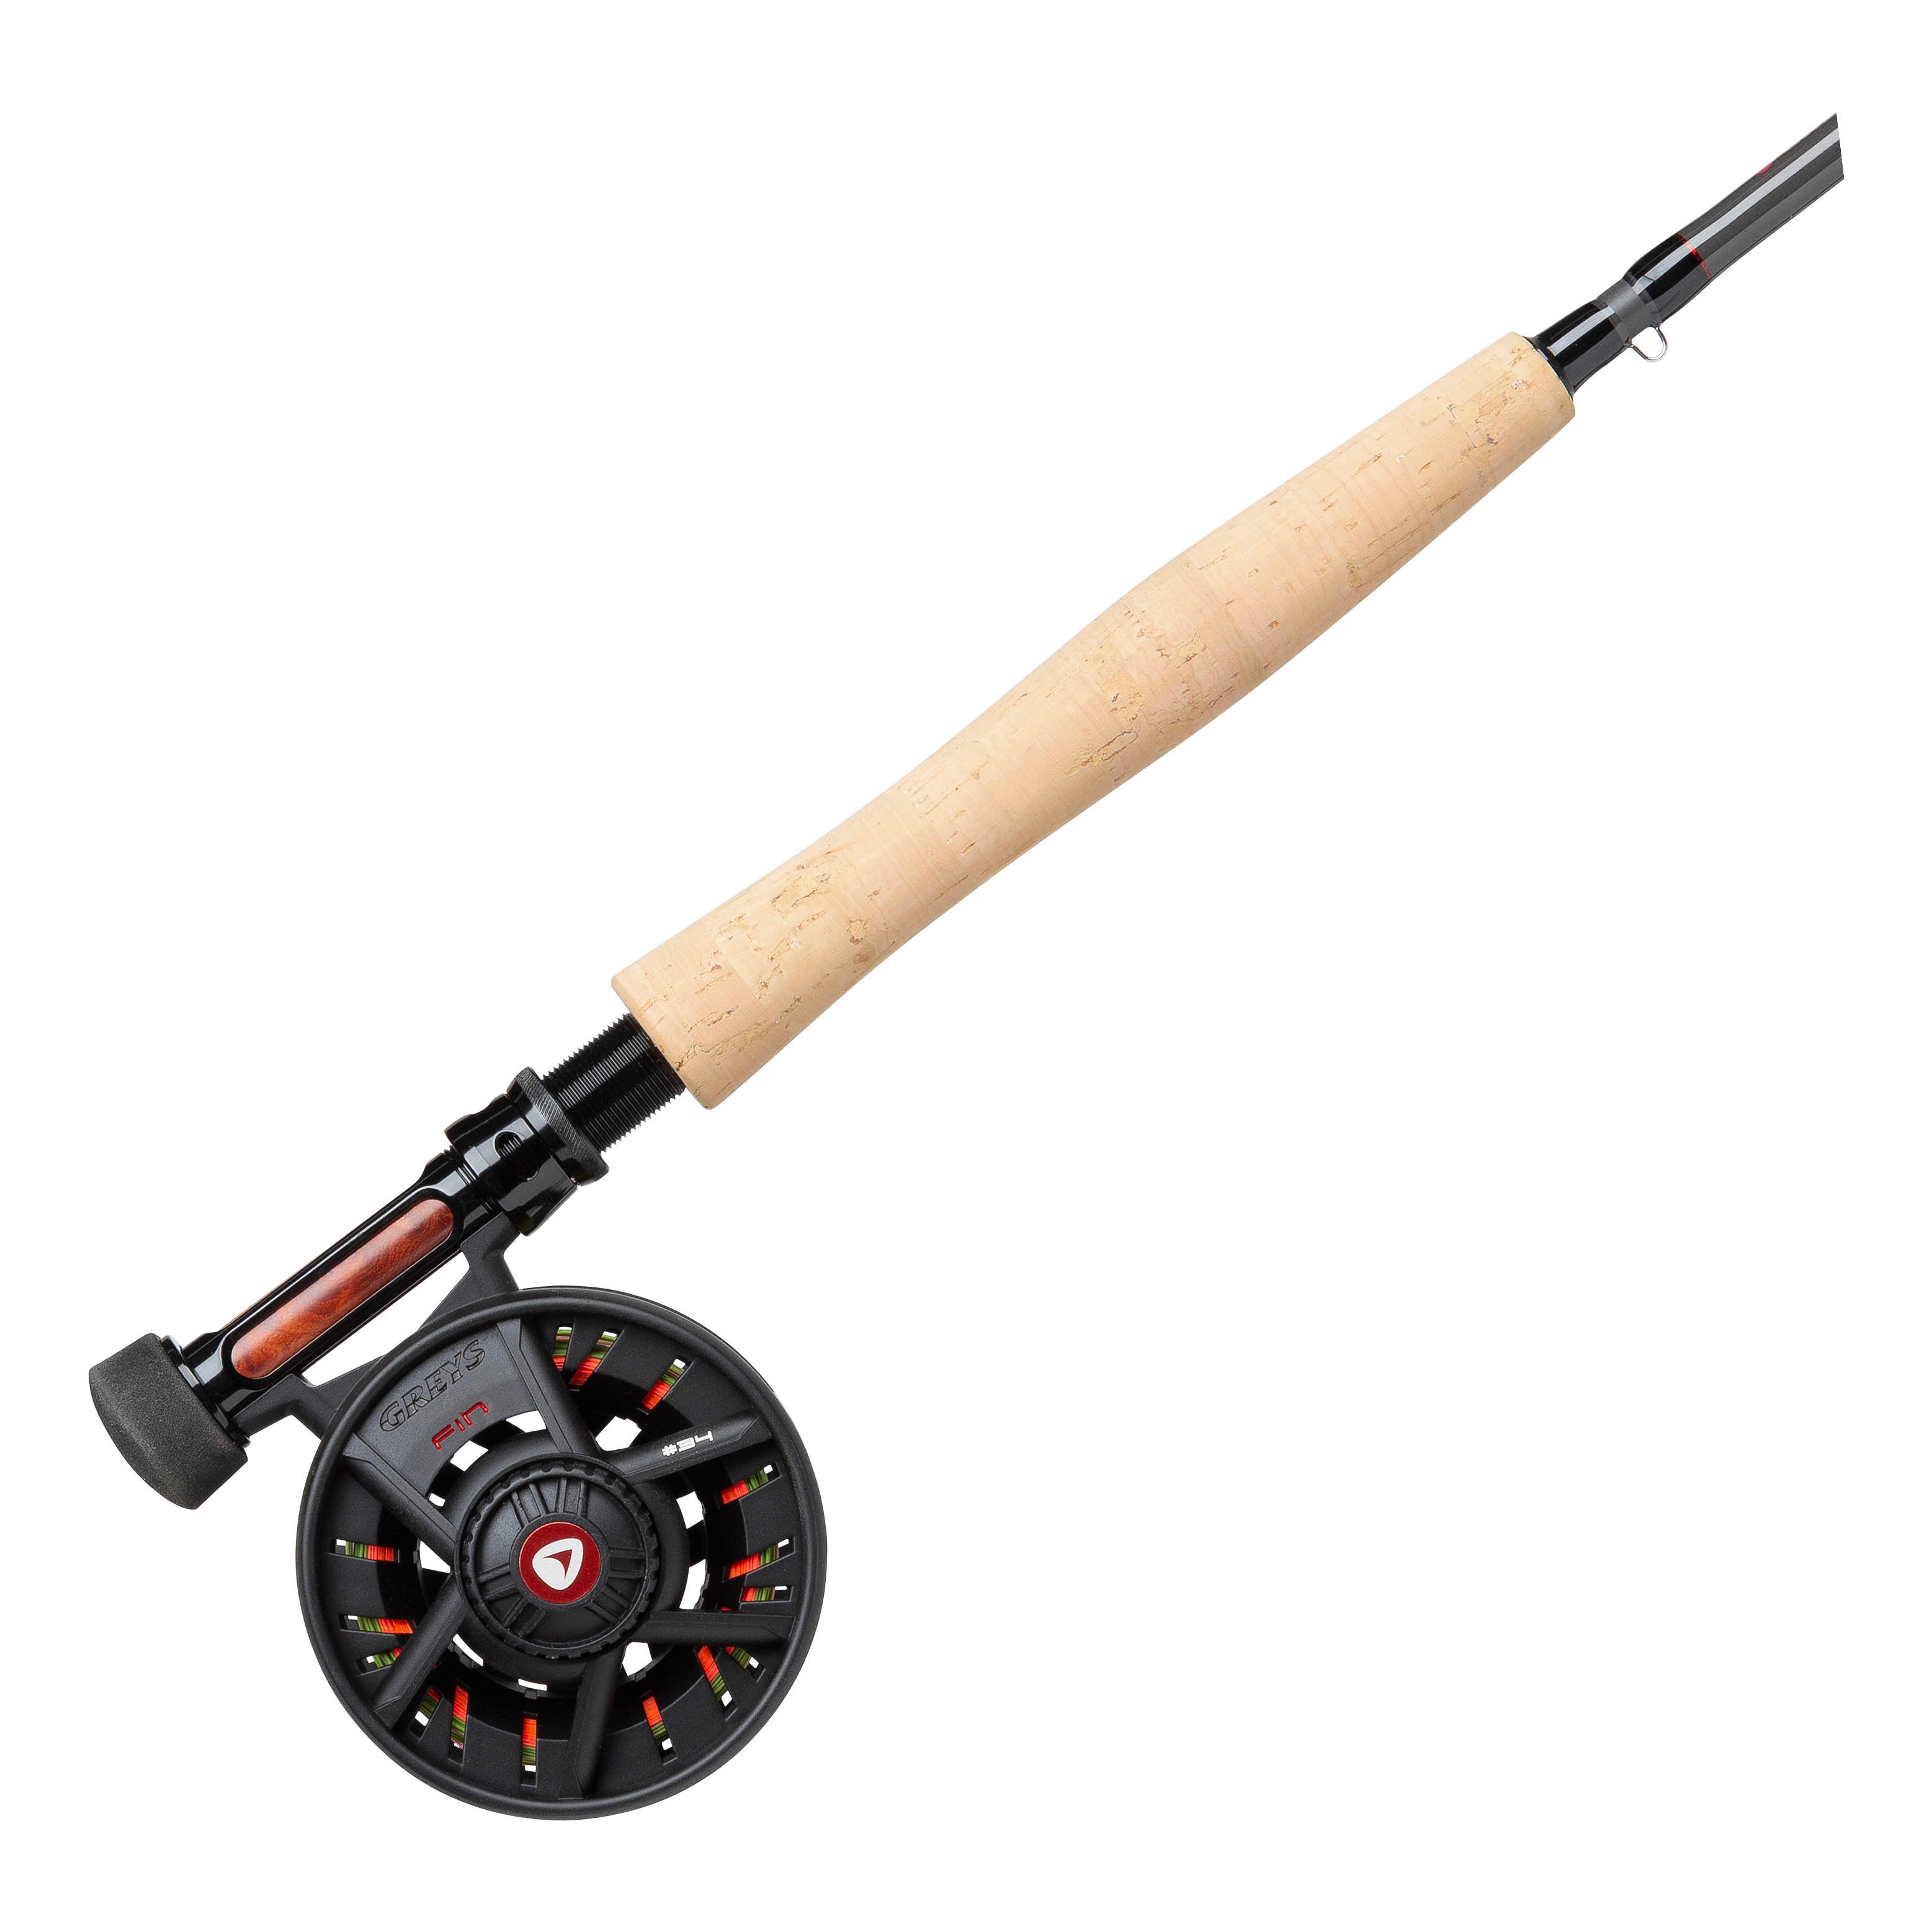 Orvis Clearwater Outfit - Trout Fly Fishing Kit